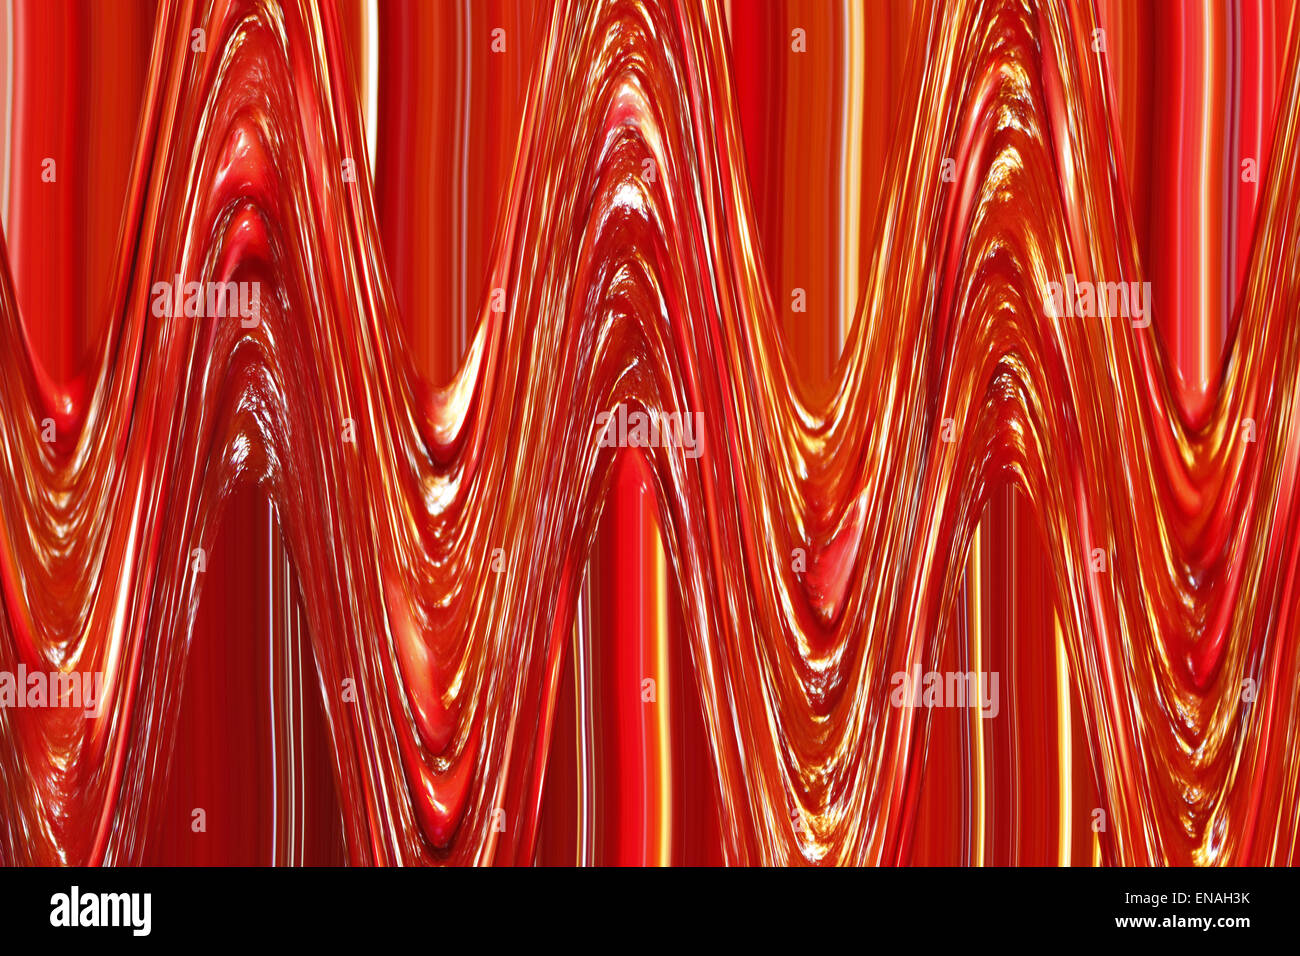 very red and unusual abstract texture with stripes Stock Photo